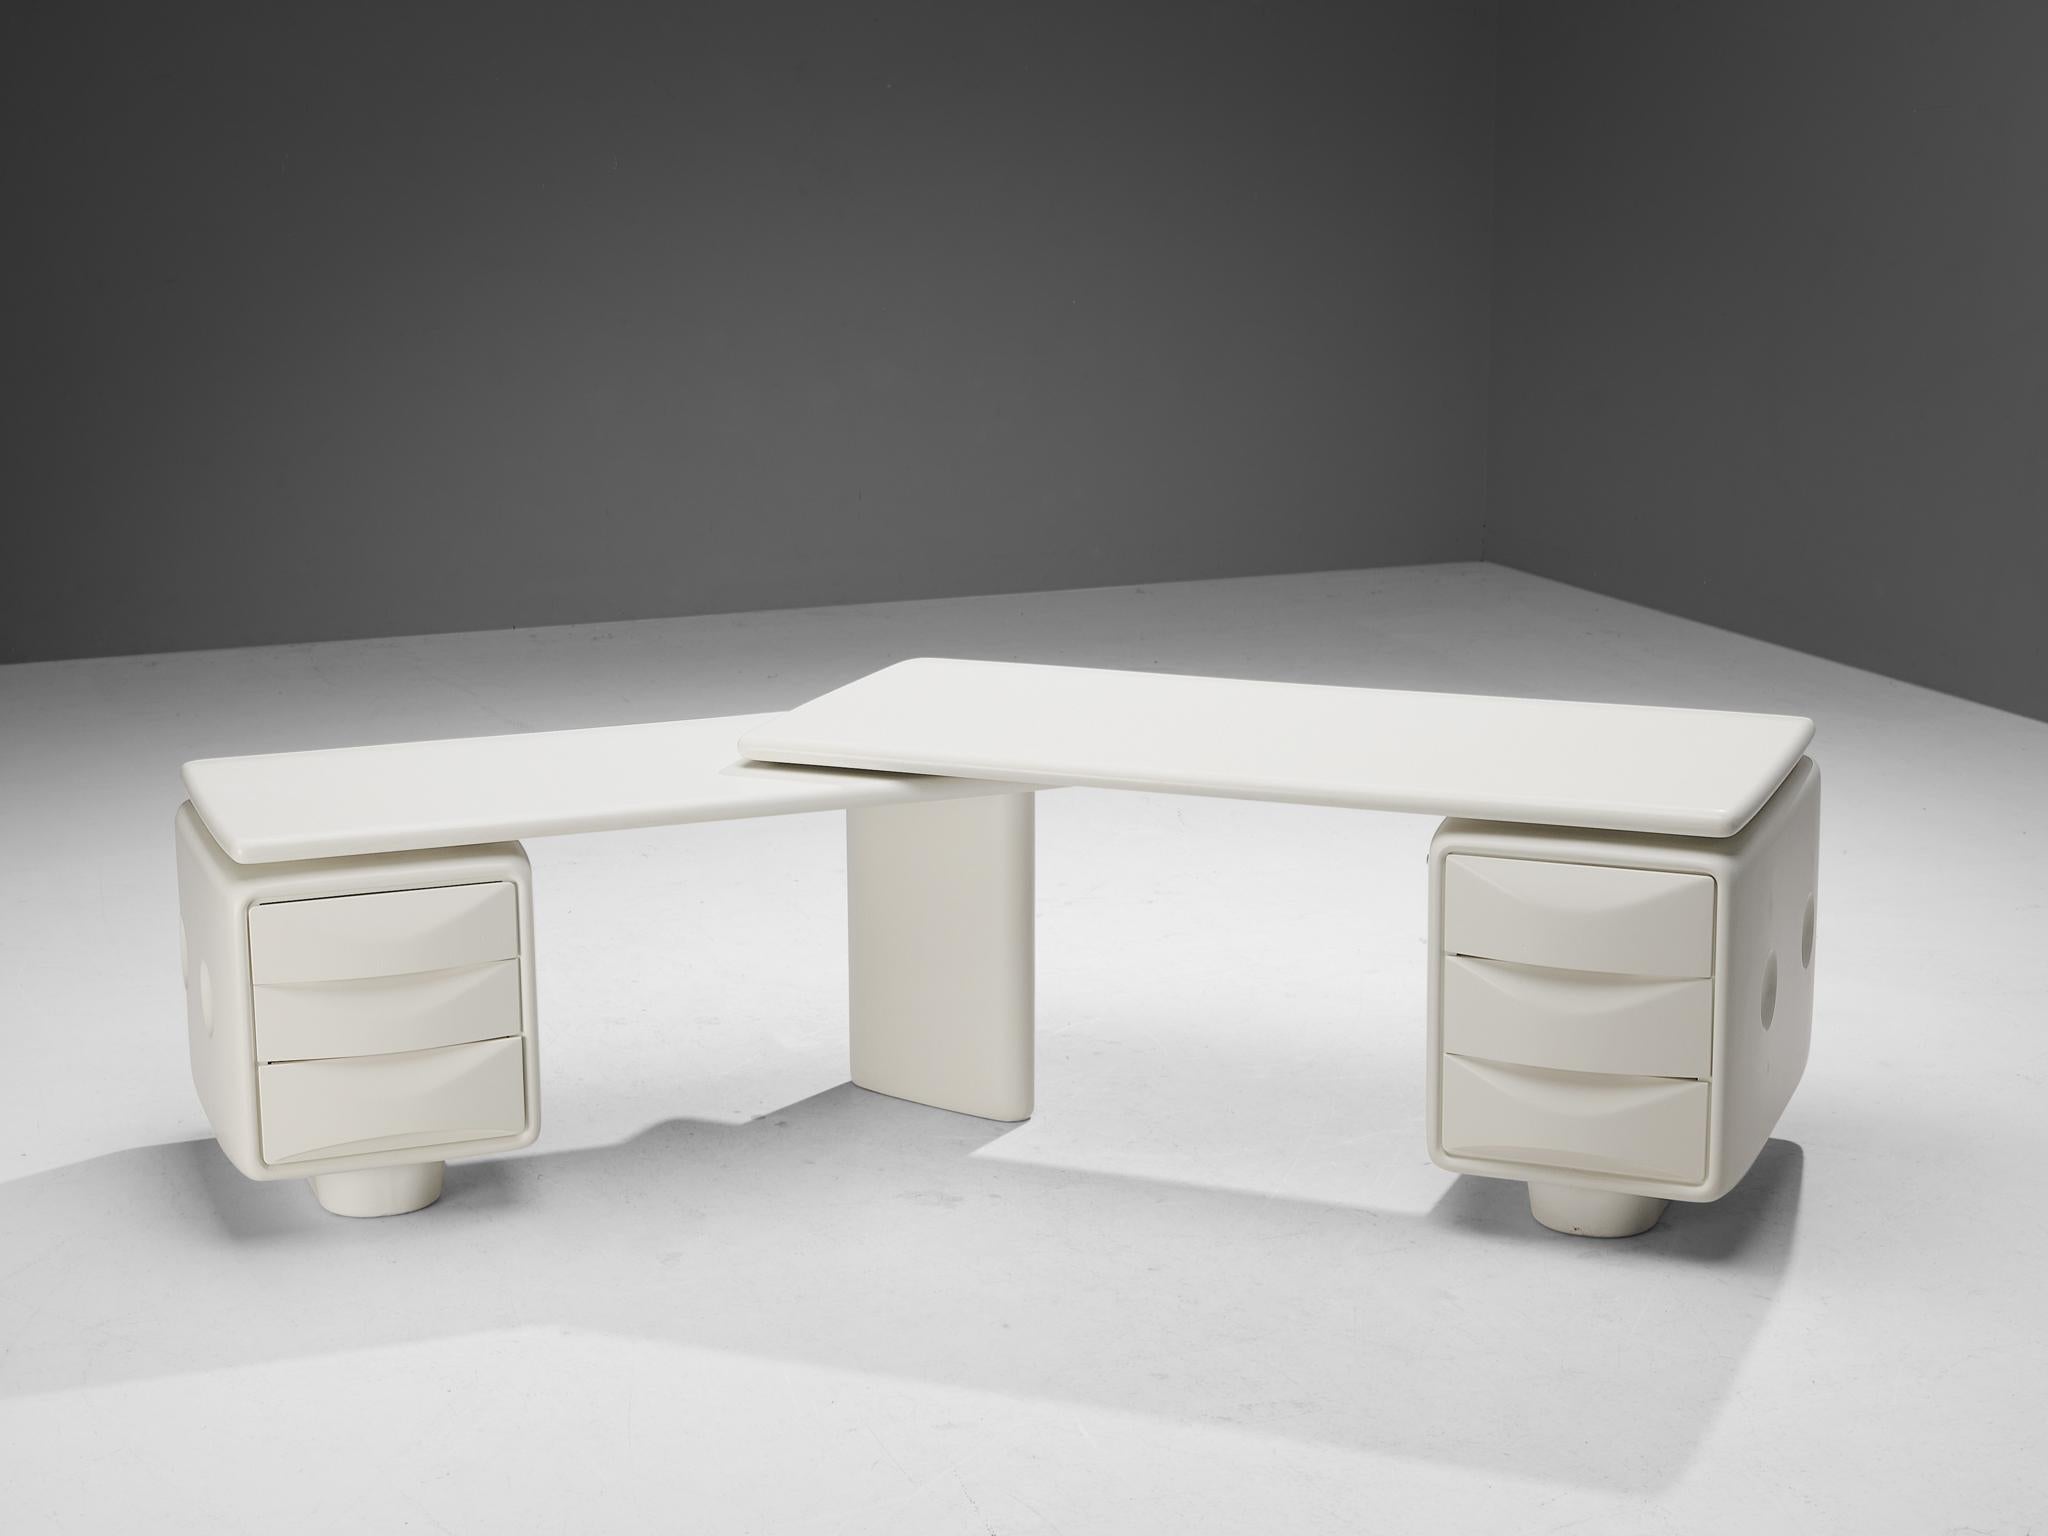 Ernest 'Igl' Hofmann for Wilhelm Werndl, corner desk, model 'Jet', fiberglass, Germany, designed in 1970 

This design truly fits within the ethos of the seventies – a bright and bold era – featuring the commonly used material of that time named